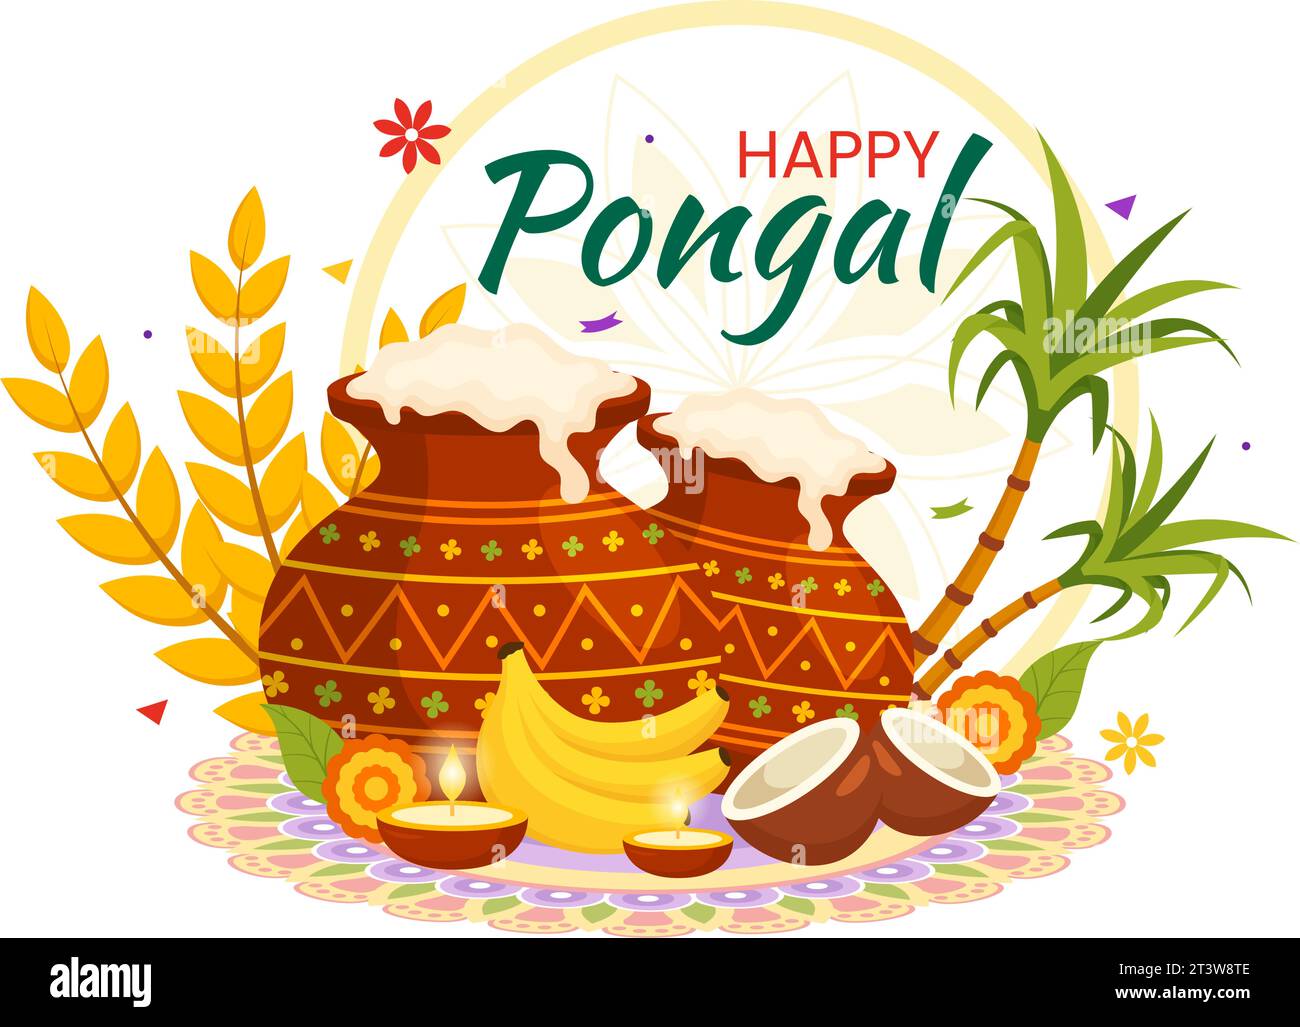 Happy Pongal Vector Illustration of Traditional Tamil Nadu India Festival Celebration with Sugarcane and Plate of Religious Props in Flat background Illustrazione Vettoriale